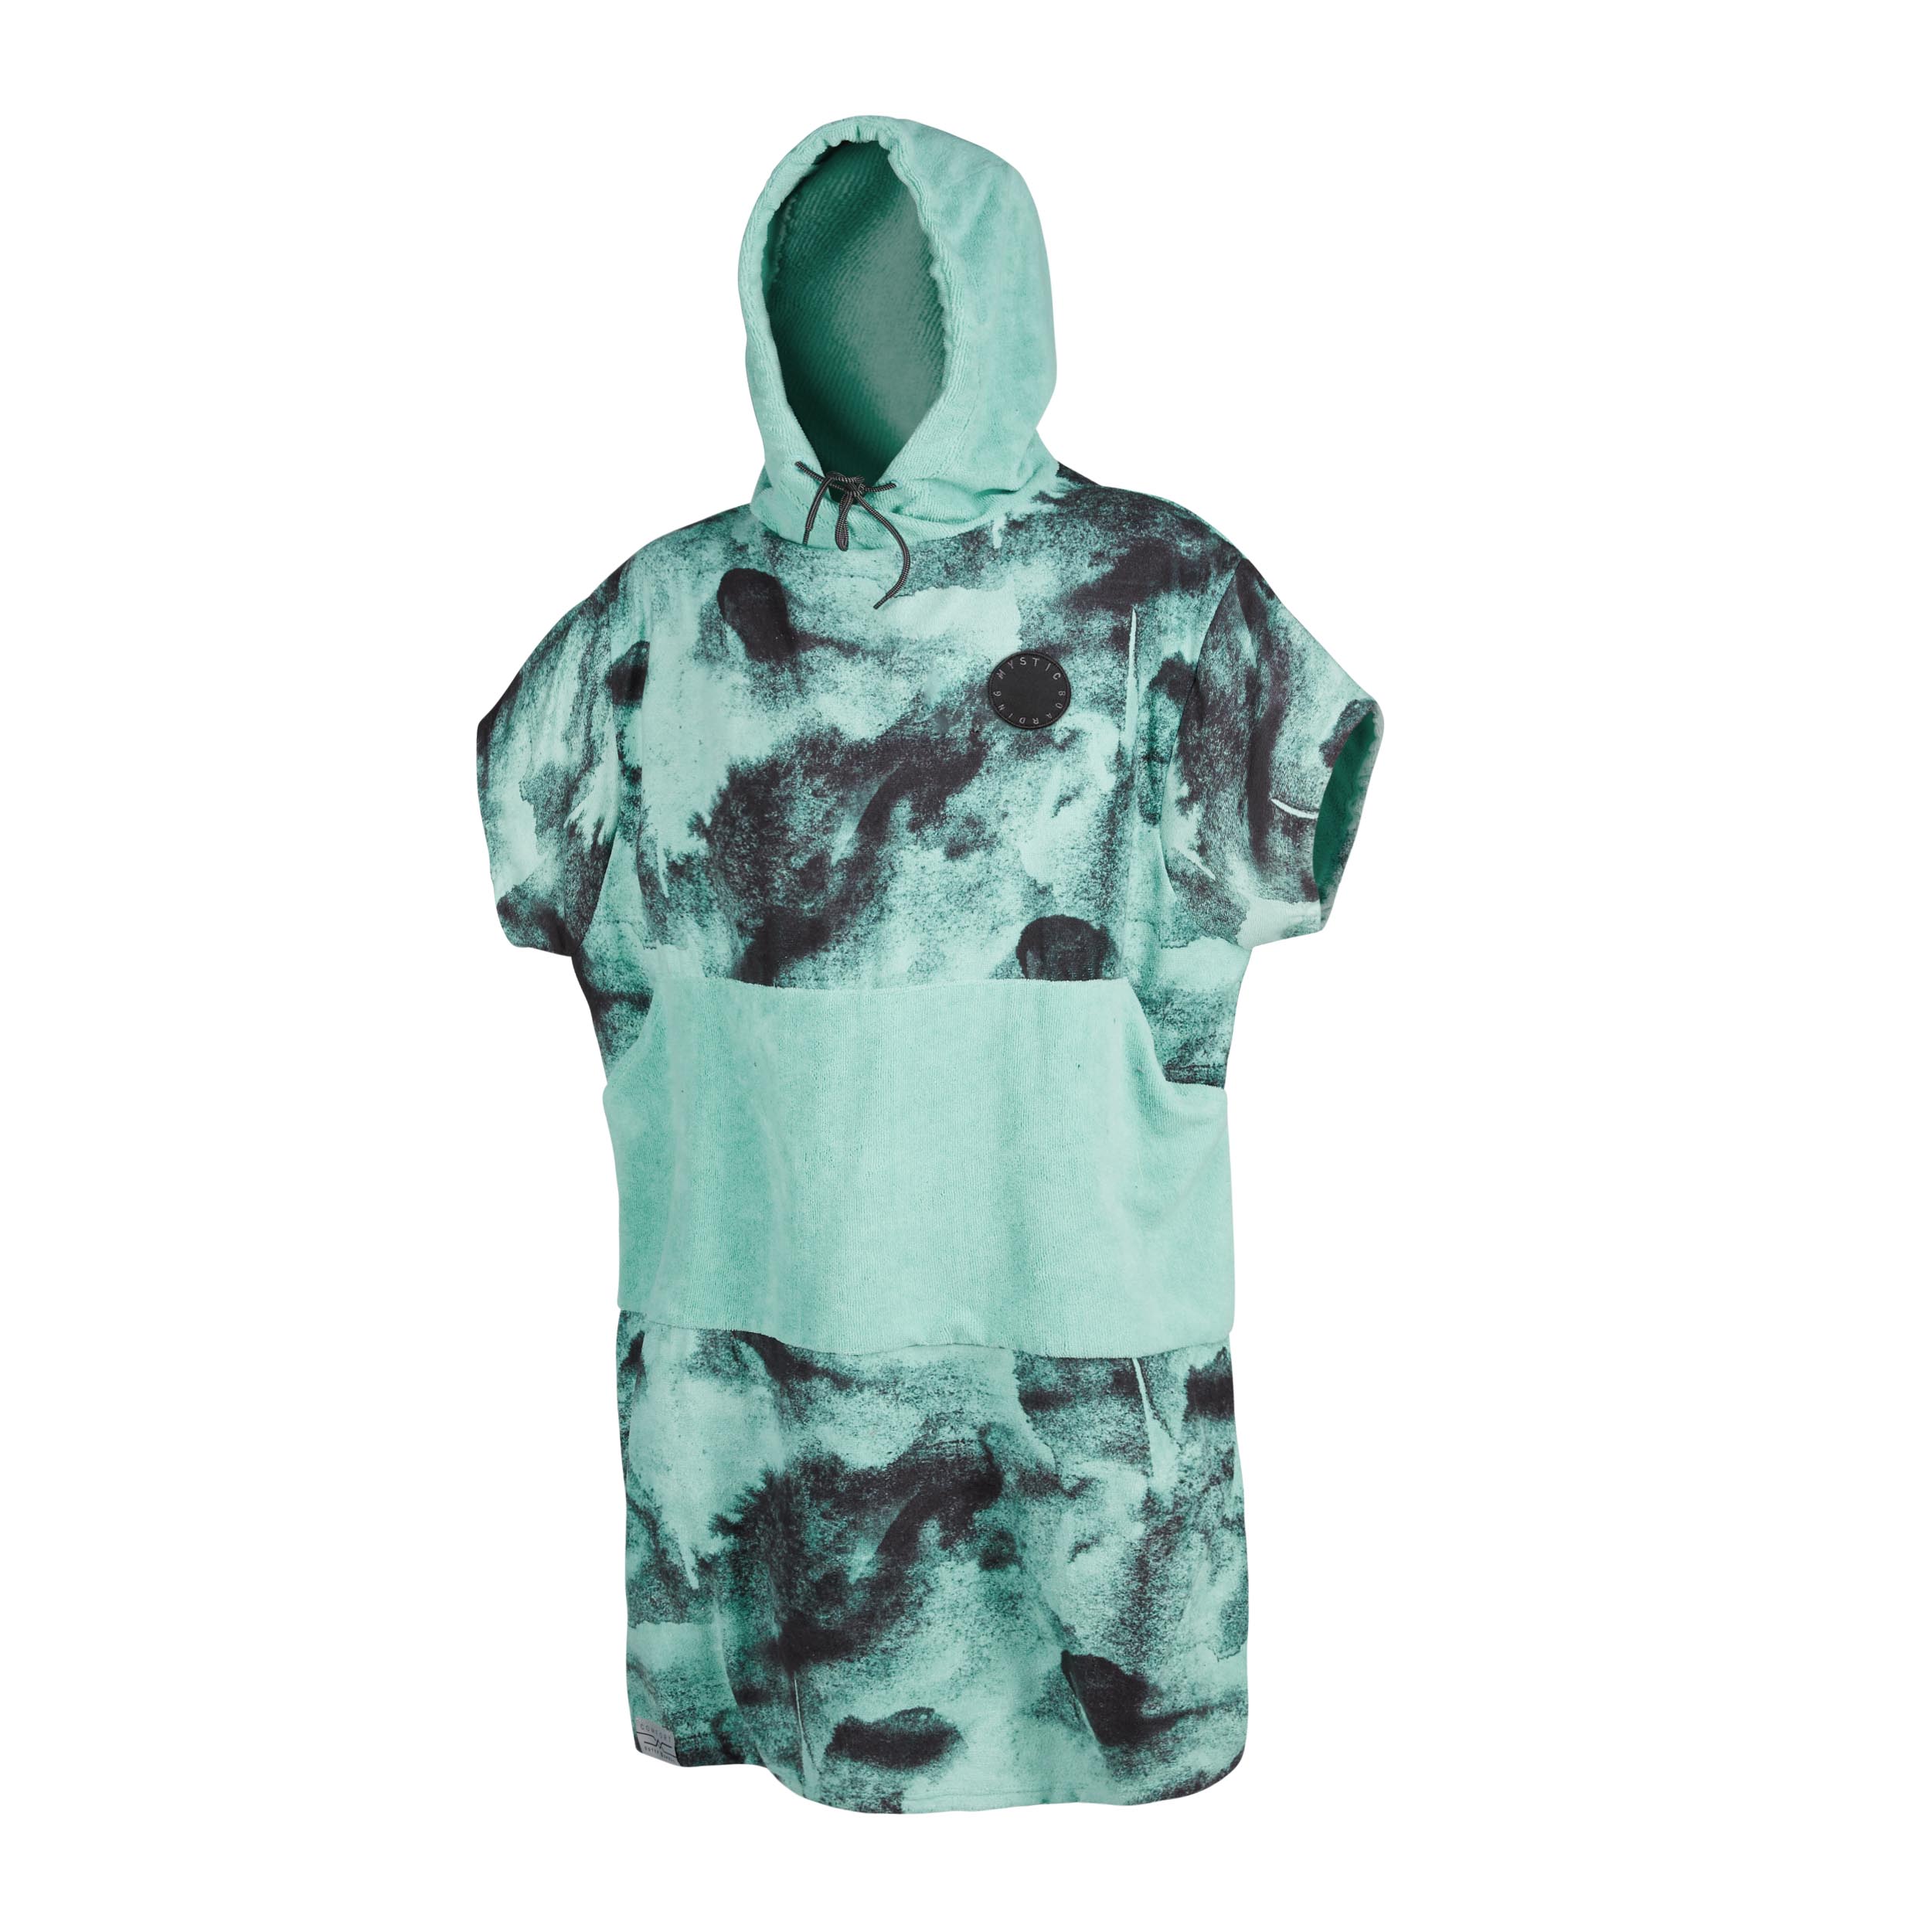 Teal Mystic Poncho Changing Towel 